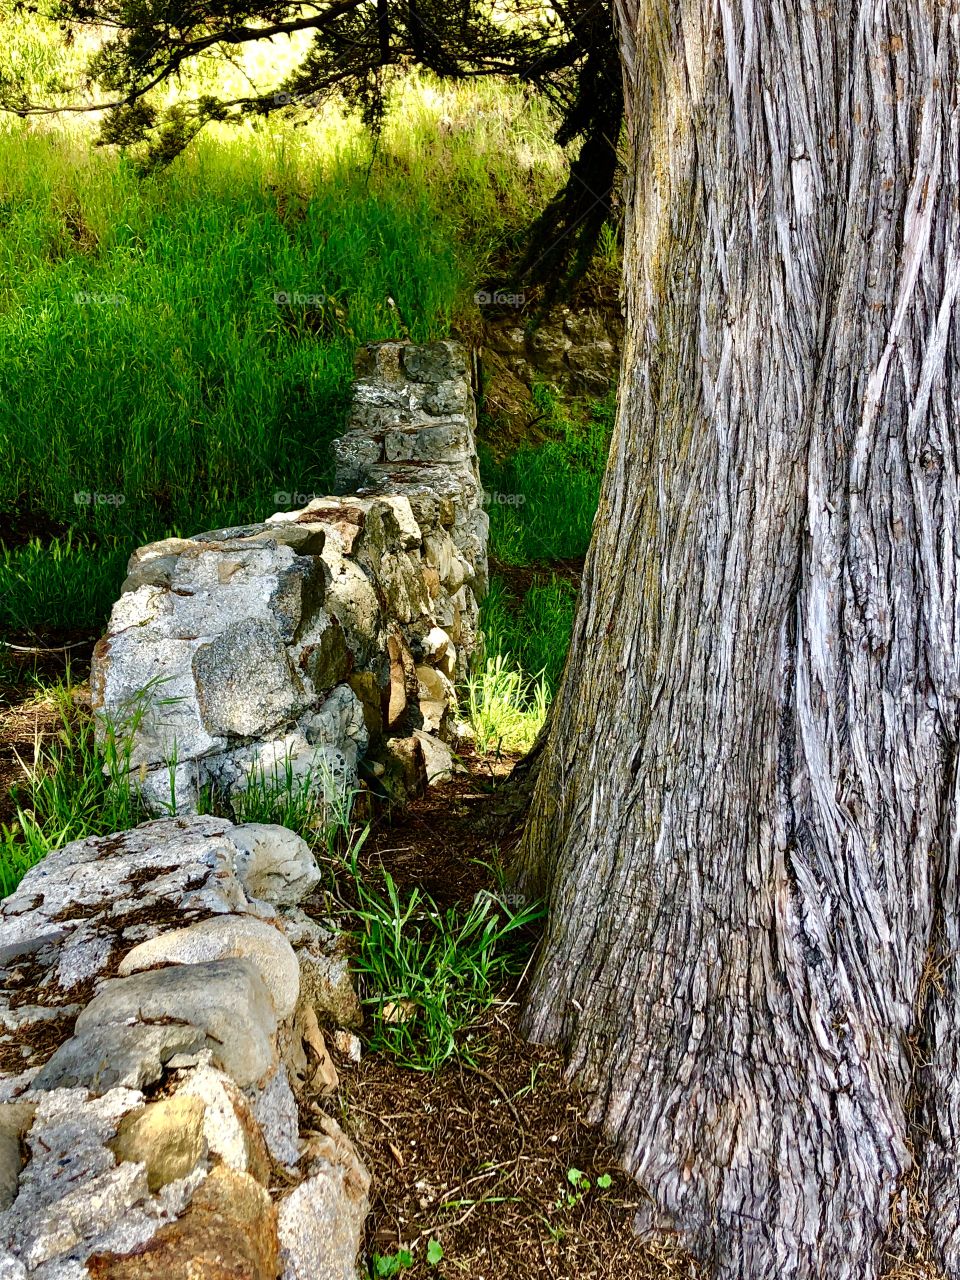 Stone and wood